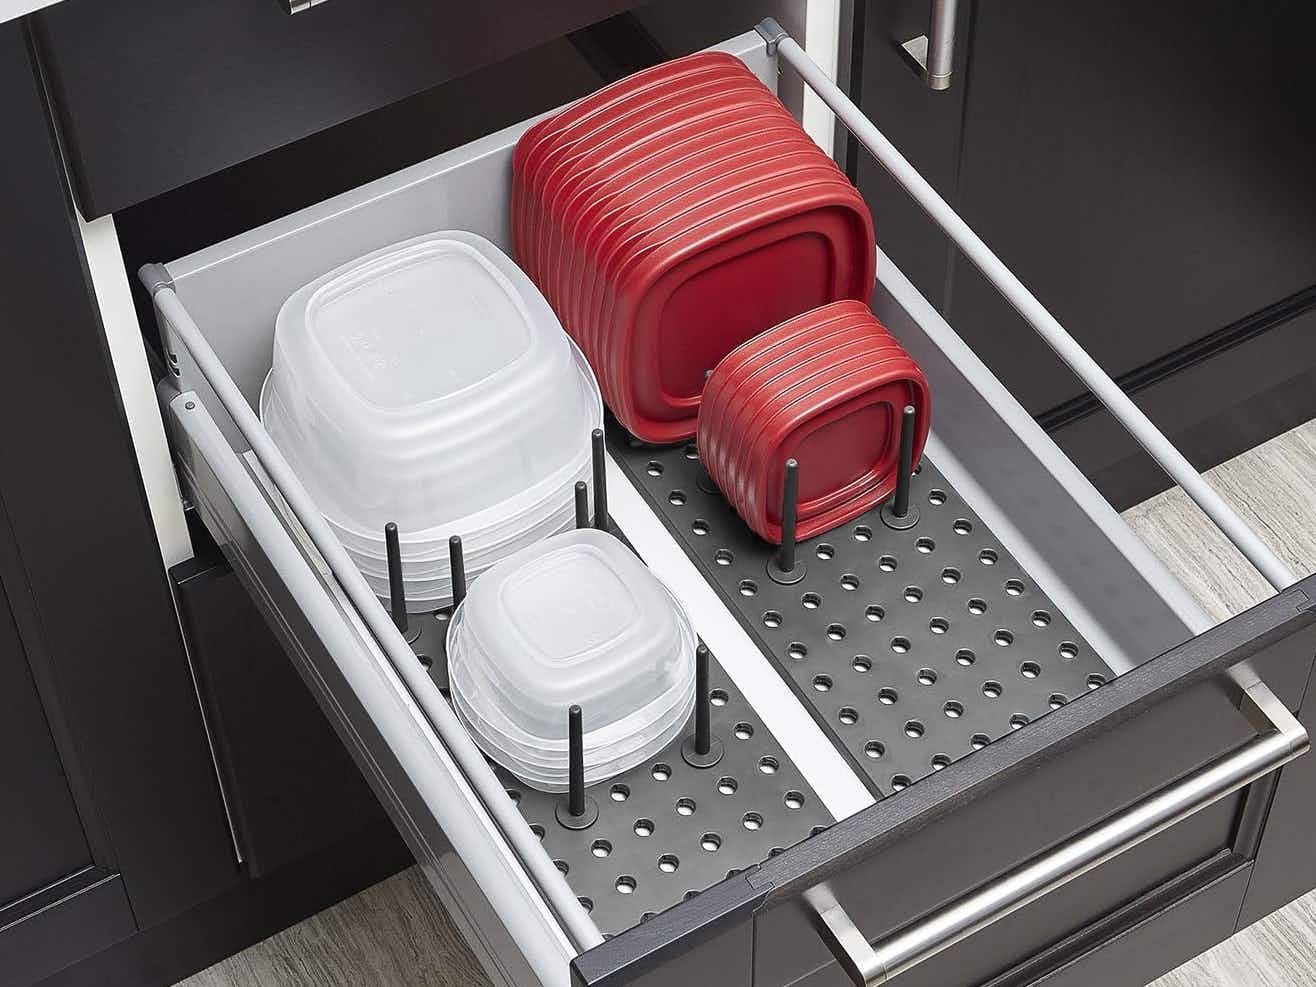 Tupperware and lids organized in a drawer using pegboards